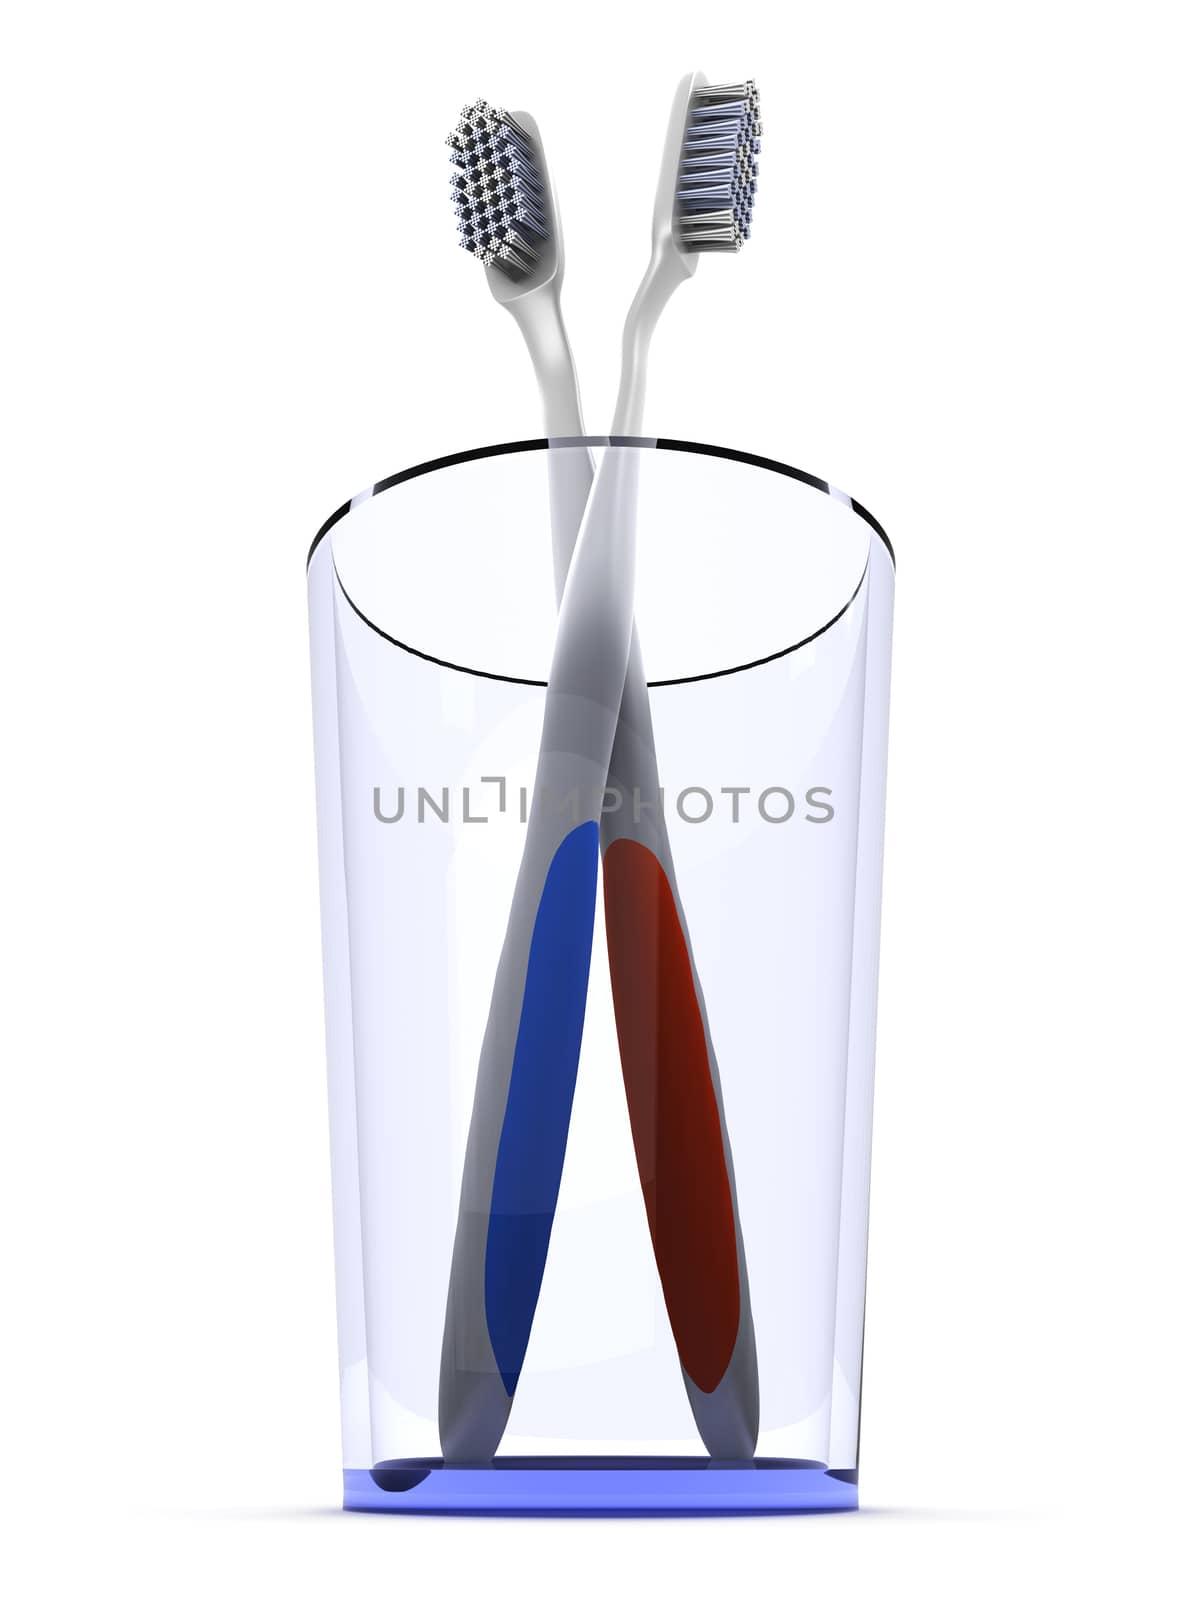 Toothbrush Couple	 by Spectral